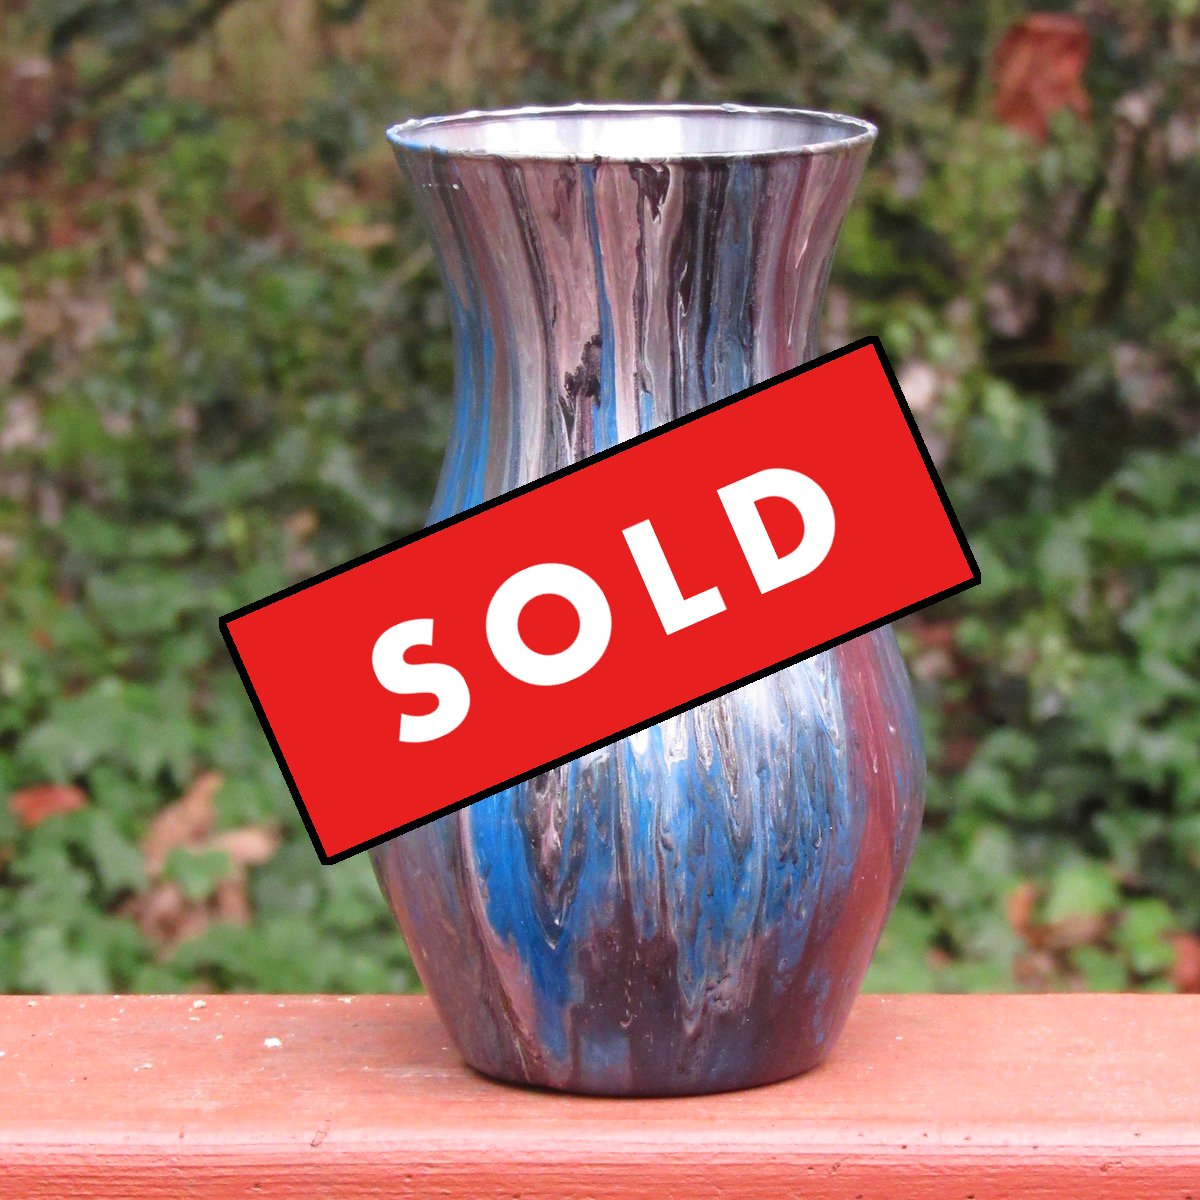 Blue and silver vase